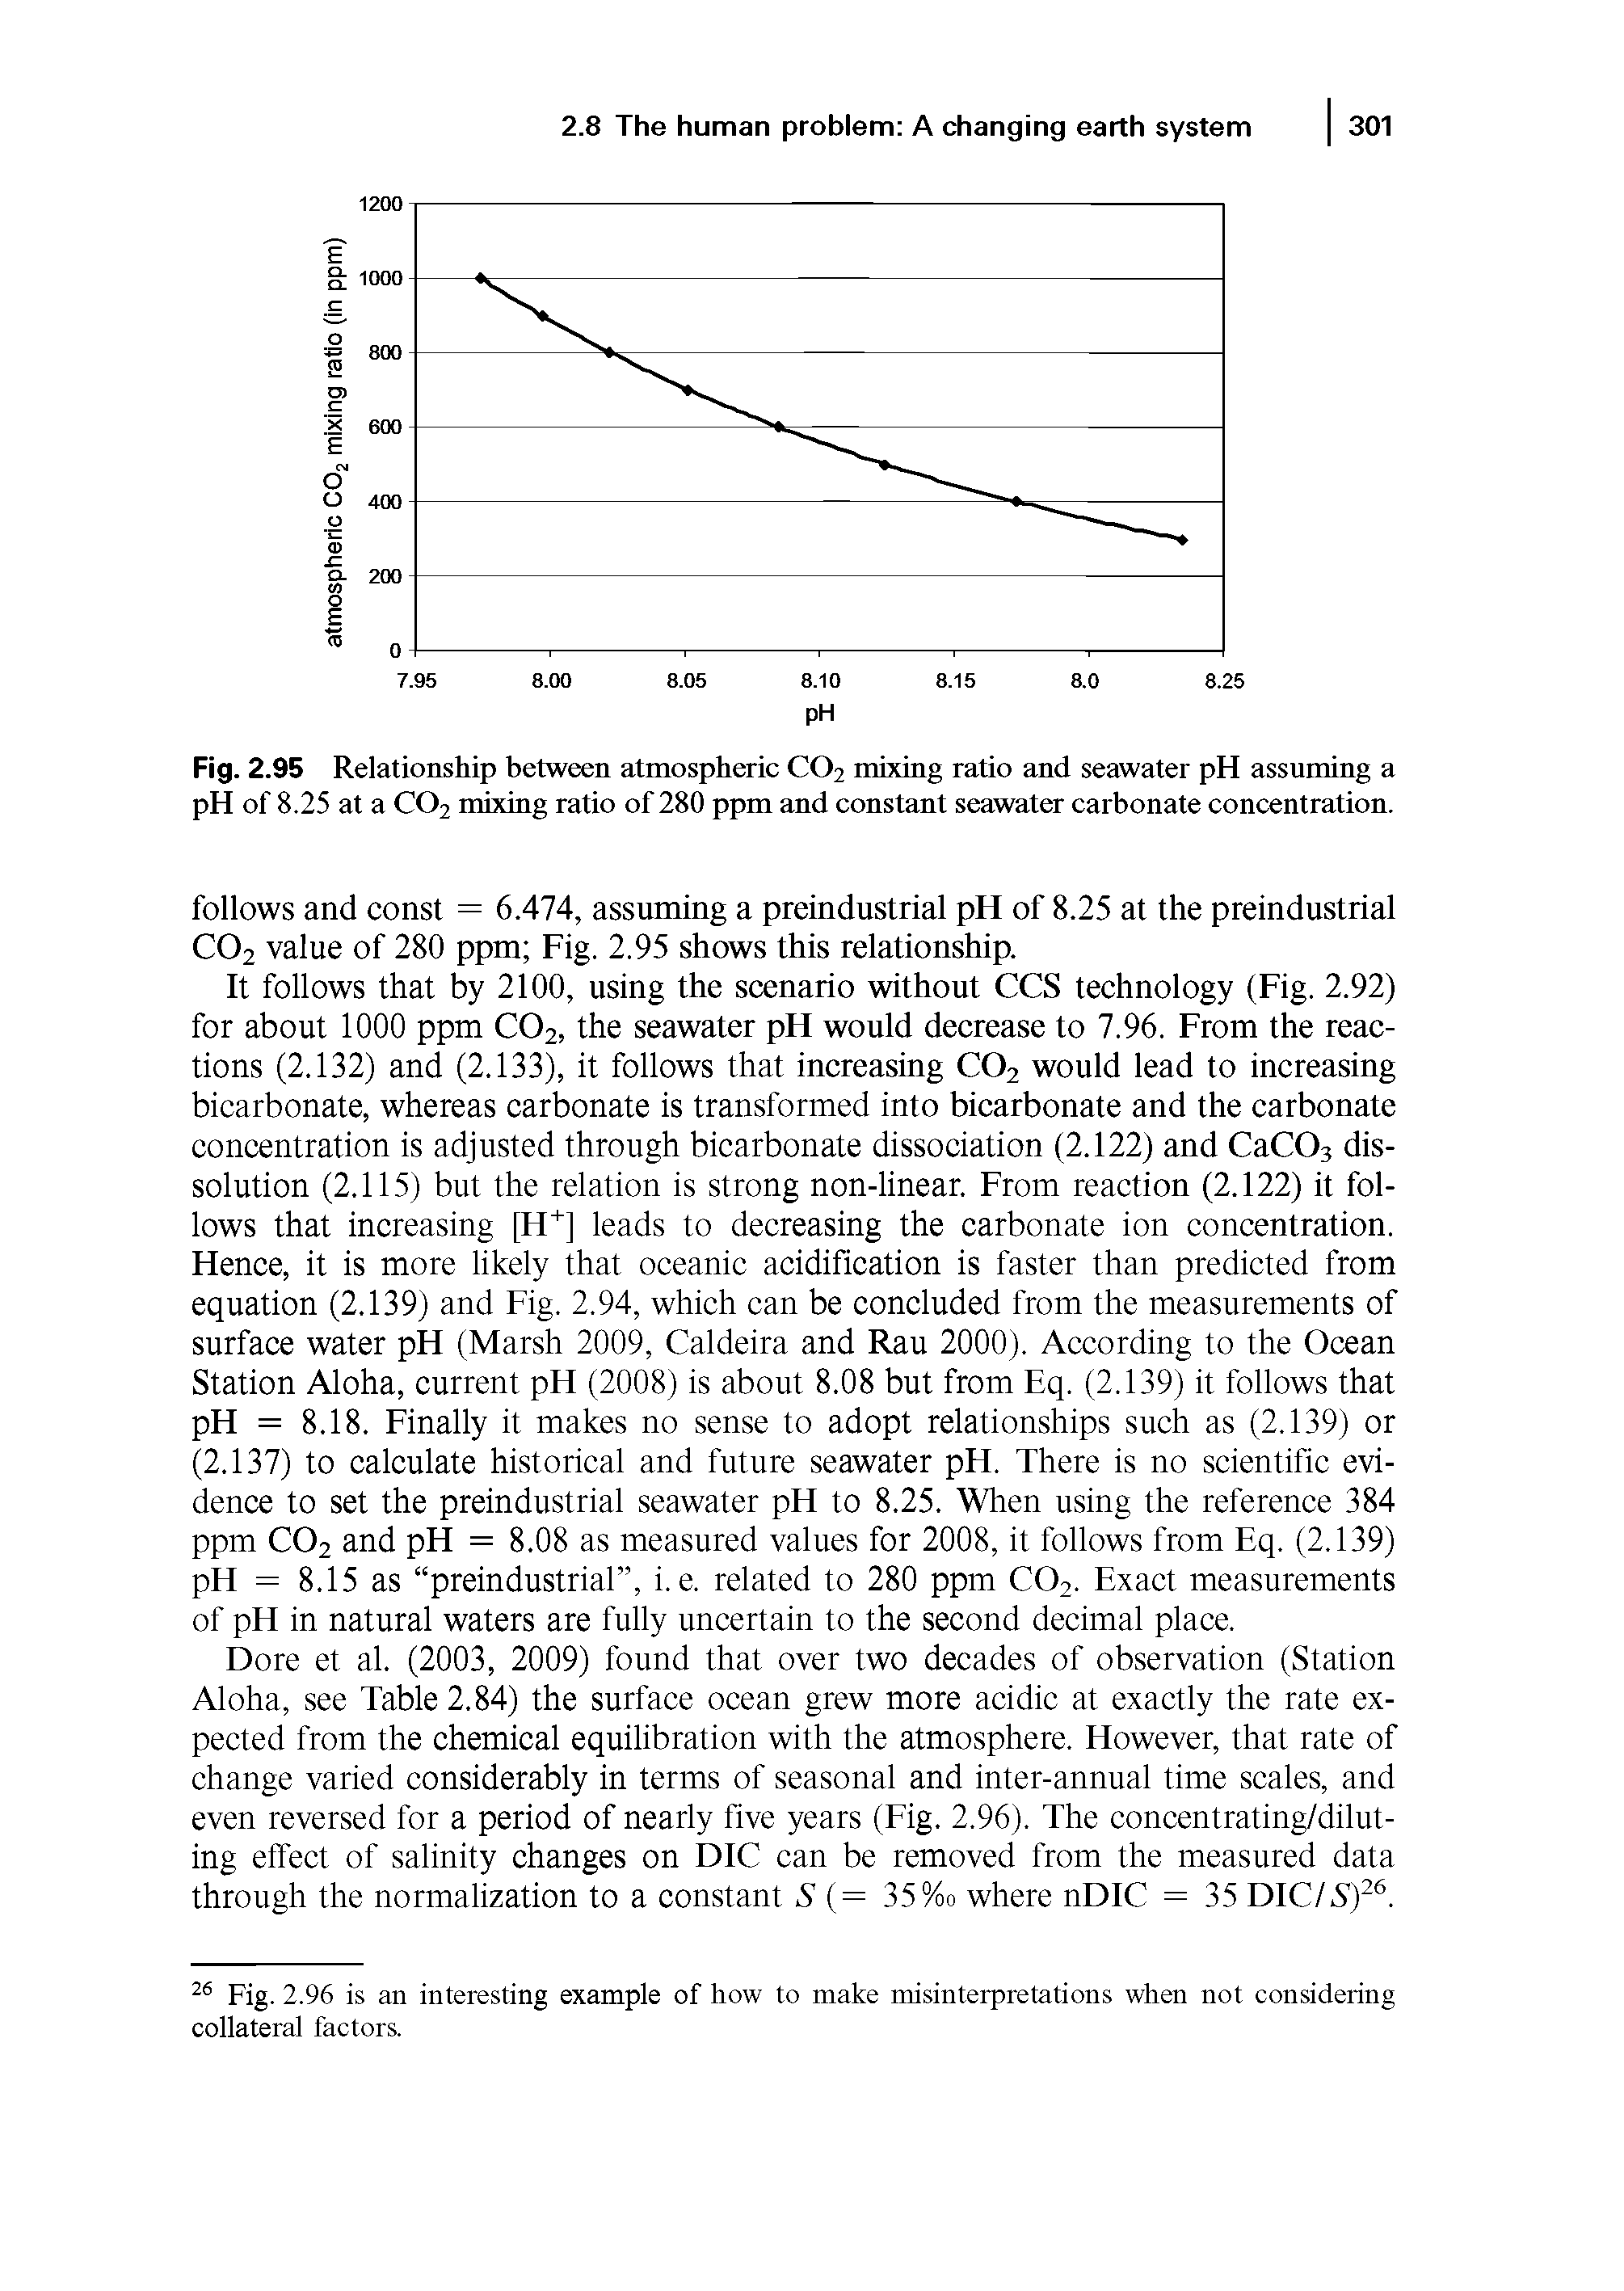 Fig. 2.95 Relationship between atmospheric CO2 mixing ratio and seawater pH assuming a pH of 8.25 at a CO2 mixing ratio of 280 ppm and constant seawater carbonate concentration.